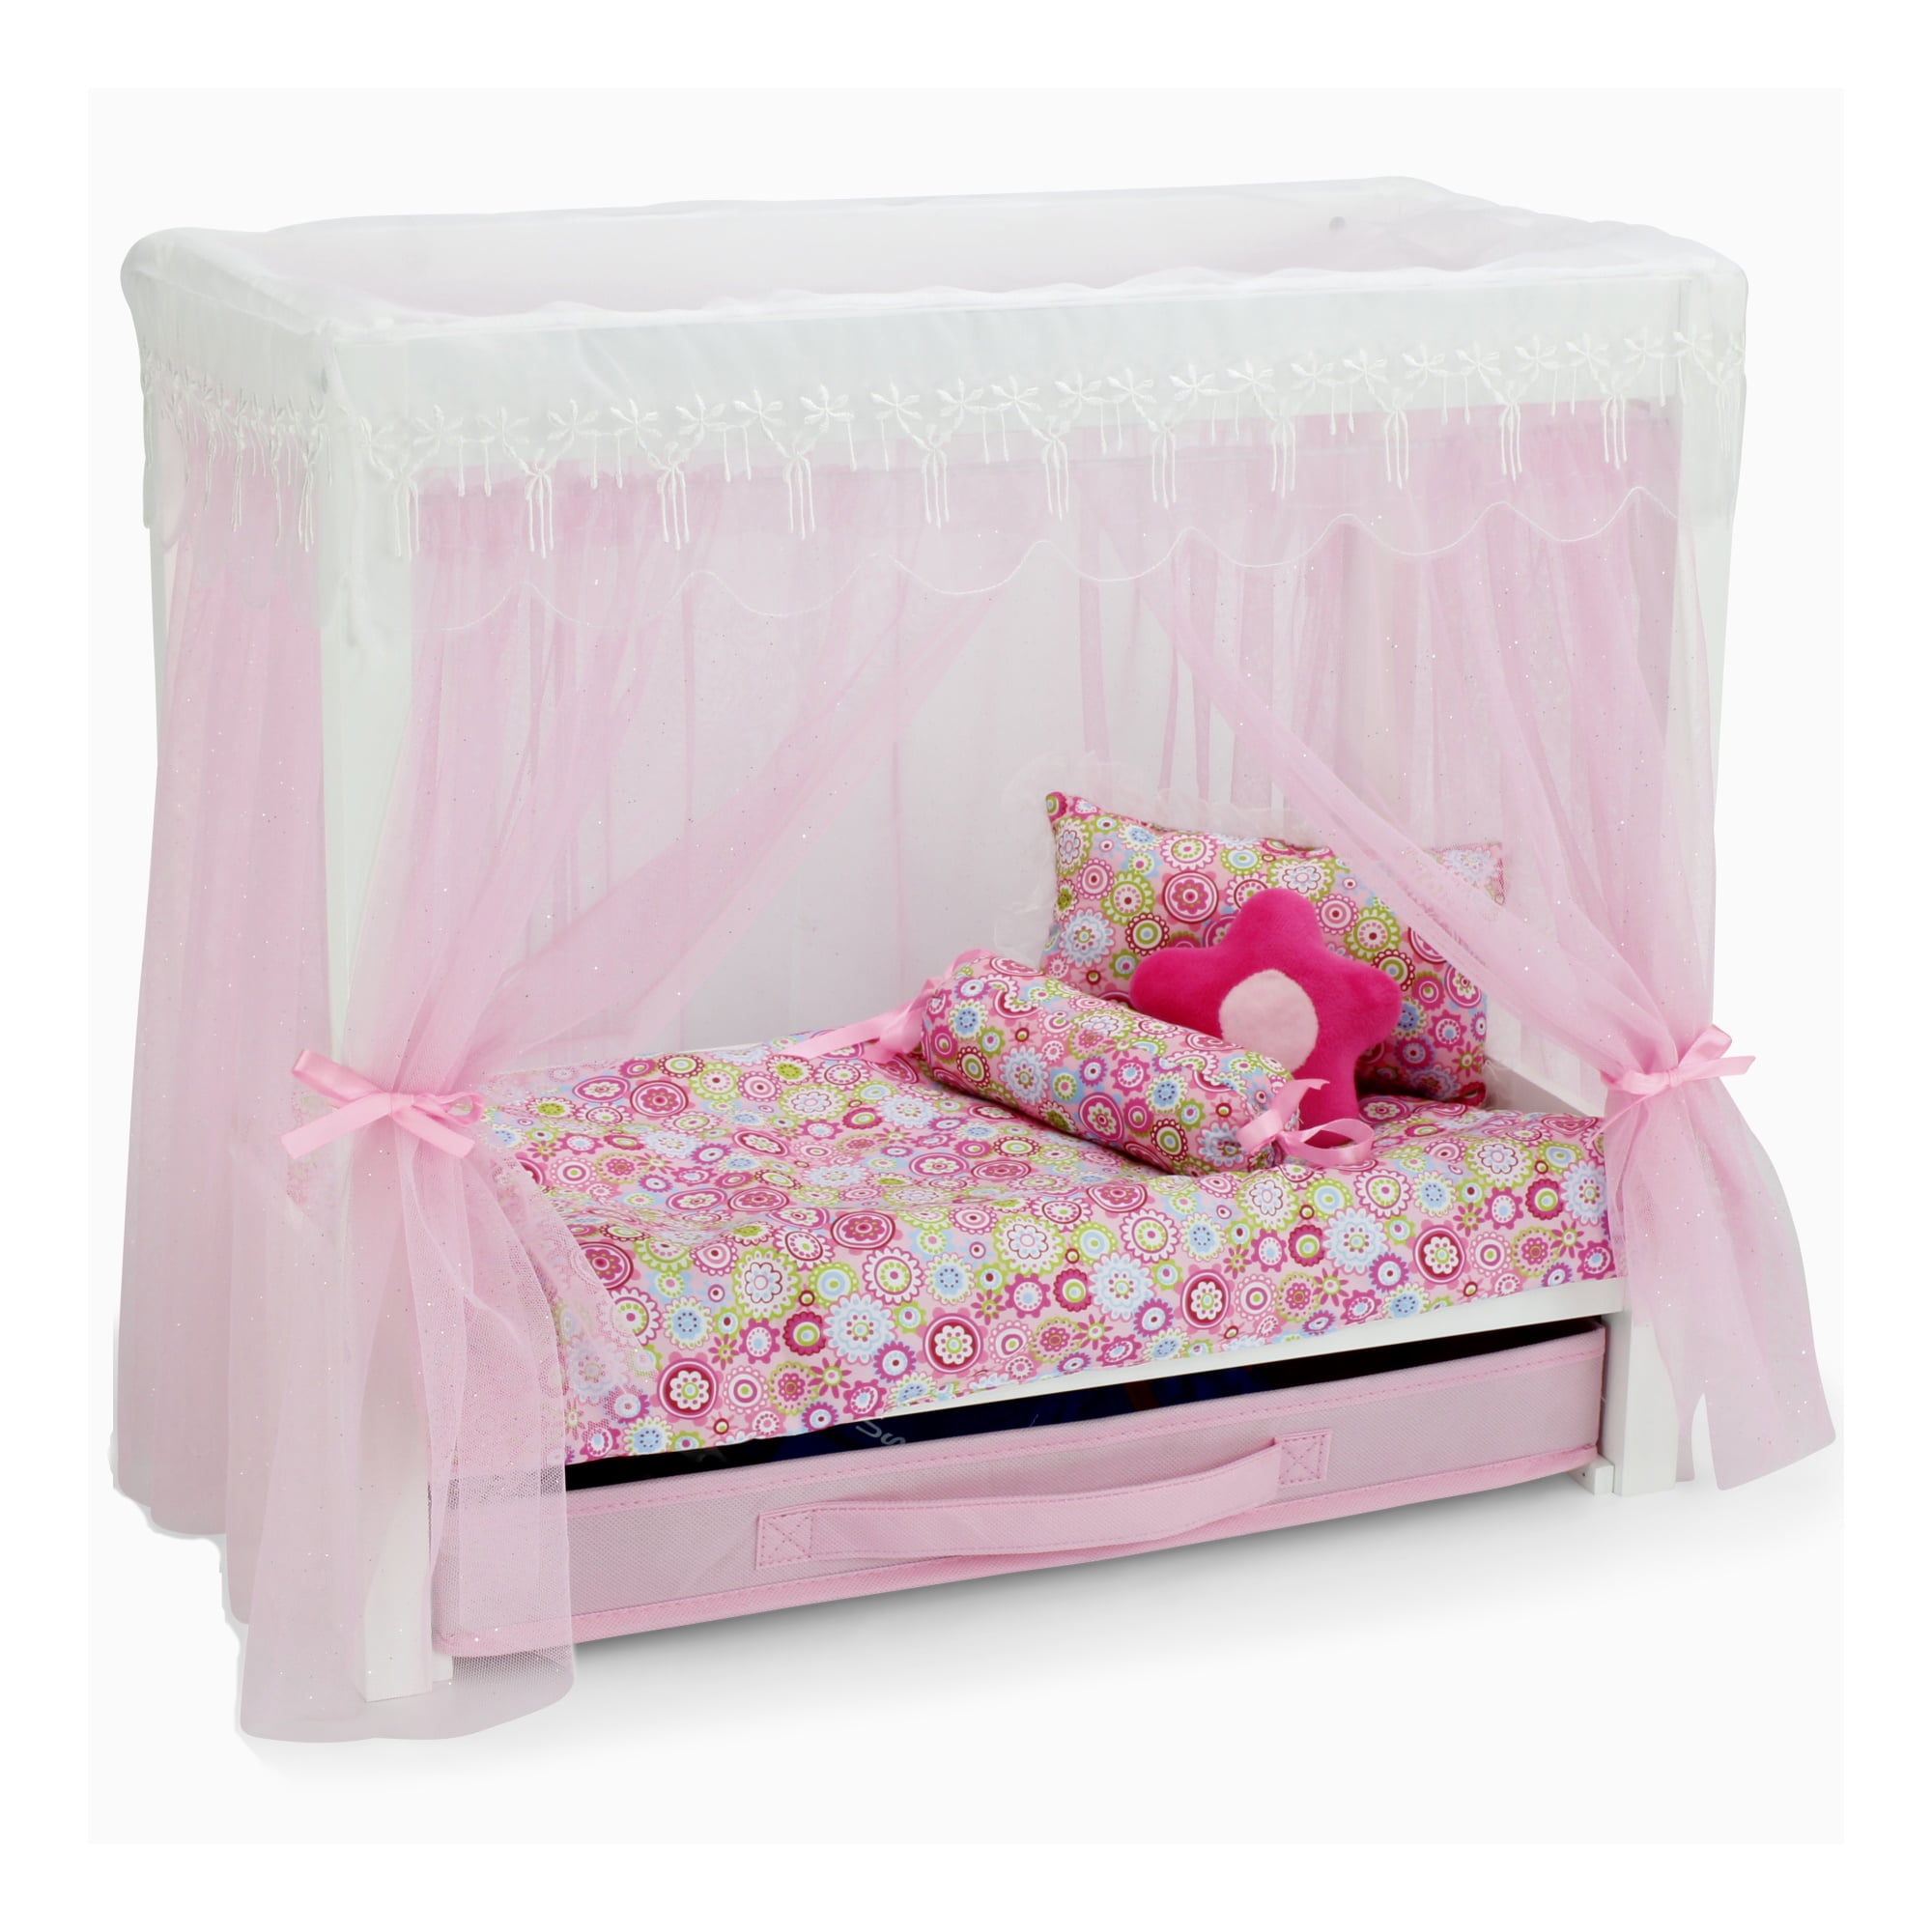 DOLL BED WITH CANOPY BLANKET & 4 PILLOWS FITS DOLLS UP TO 20" & AMERICAN GIRL 